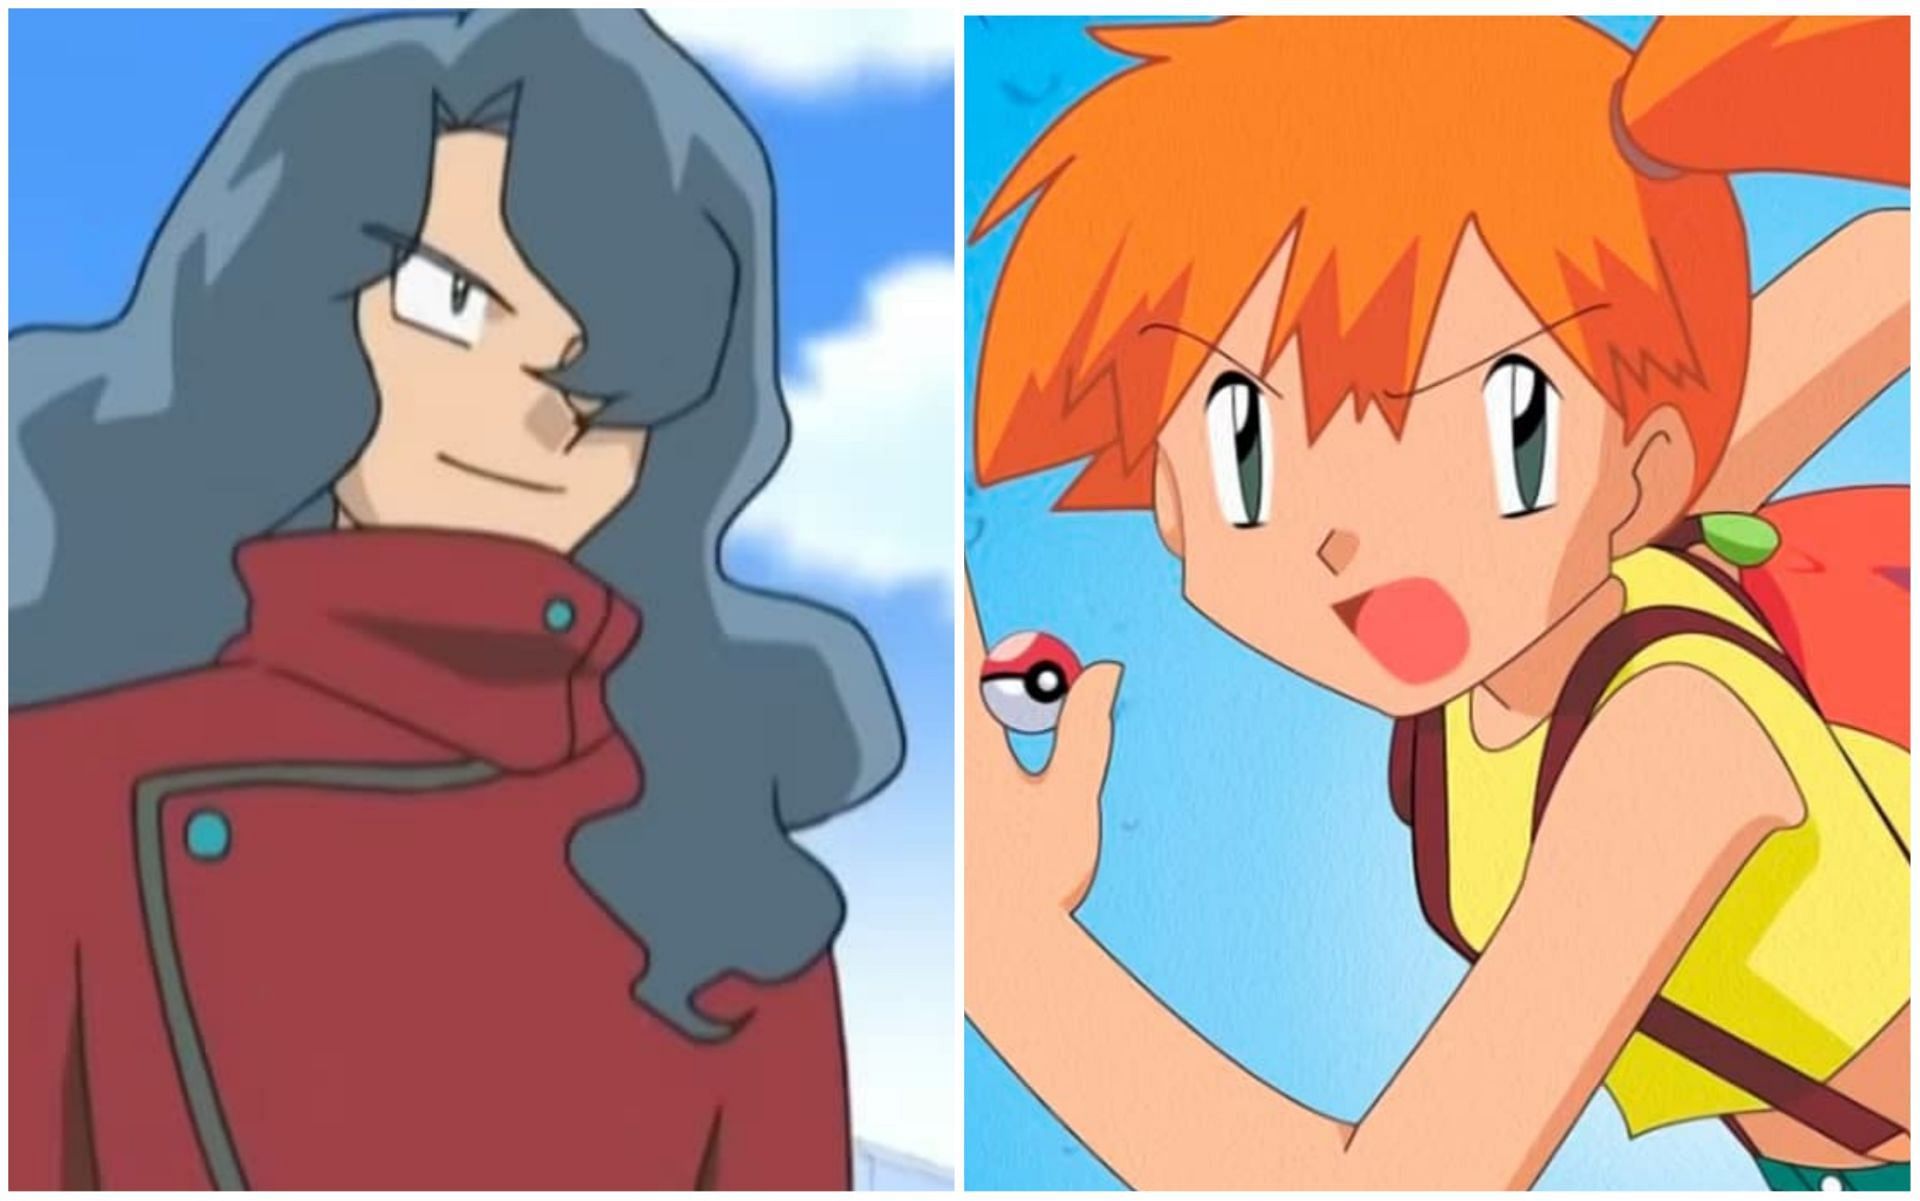 Red vs Ash: Which Pokemon trainer will win this legendary battle?